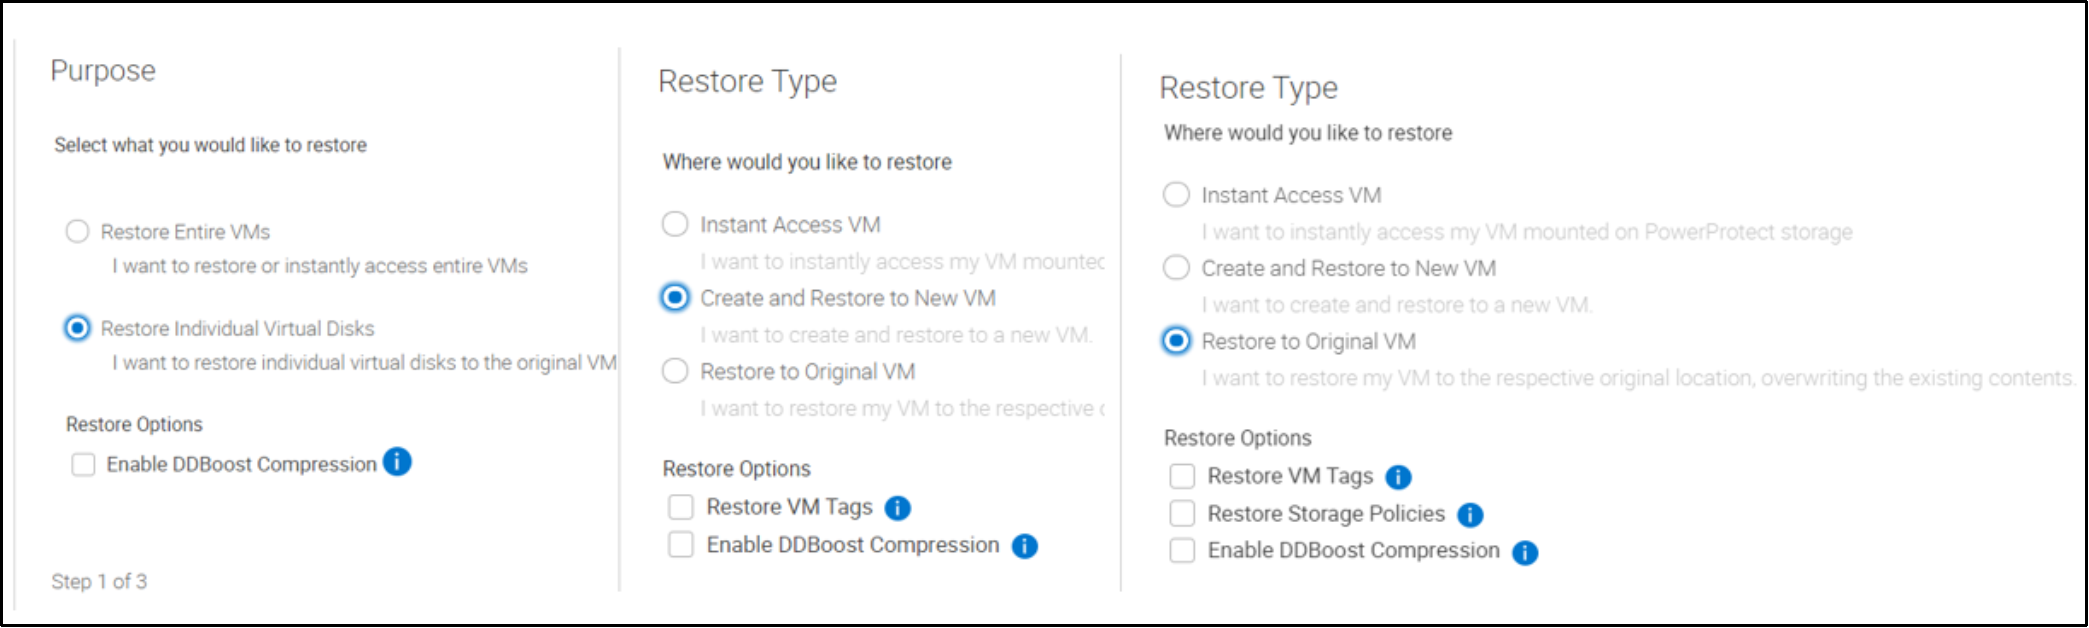 This Diagram depicts option to Enable DD Boost Compression from Data Manager UI during restore.